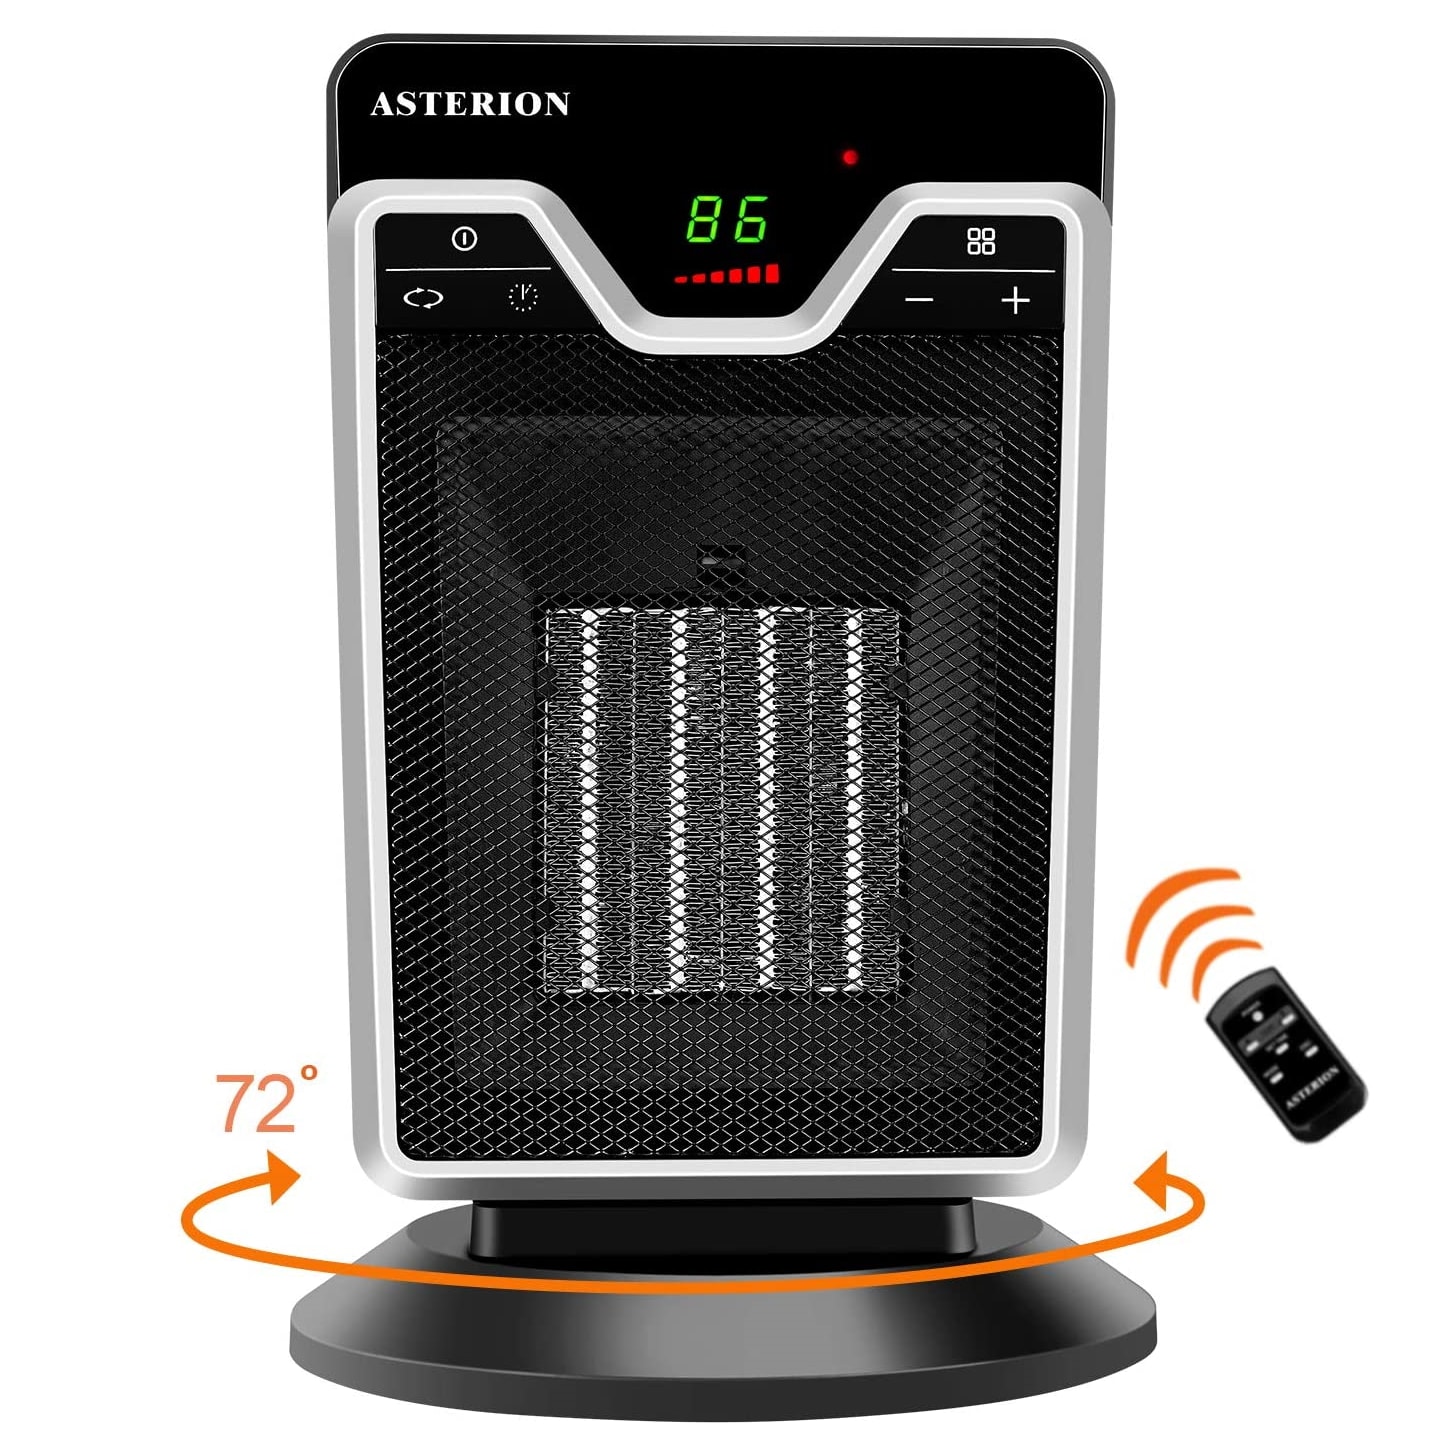 ASTERION Ceramic Space Heater